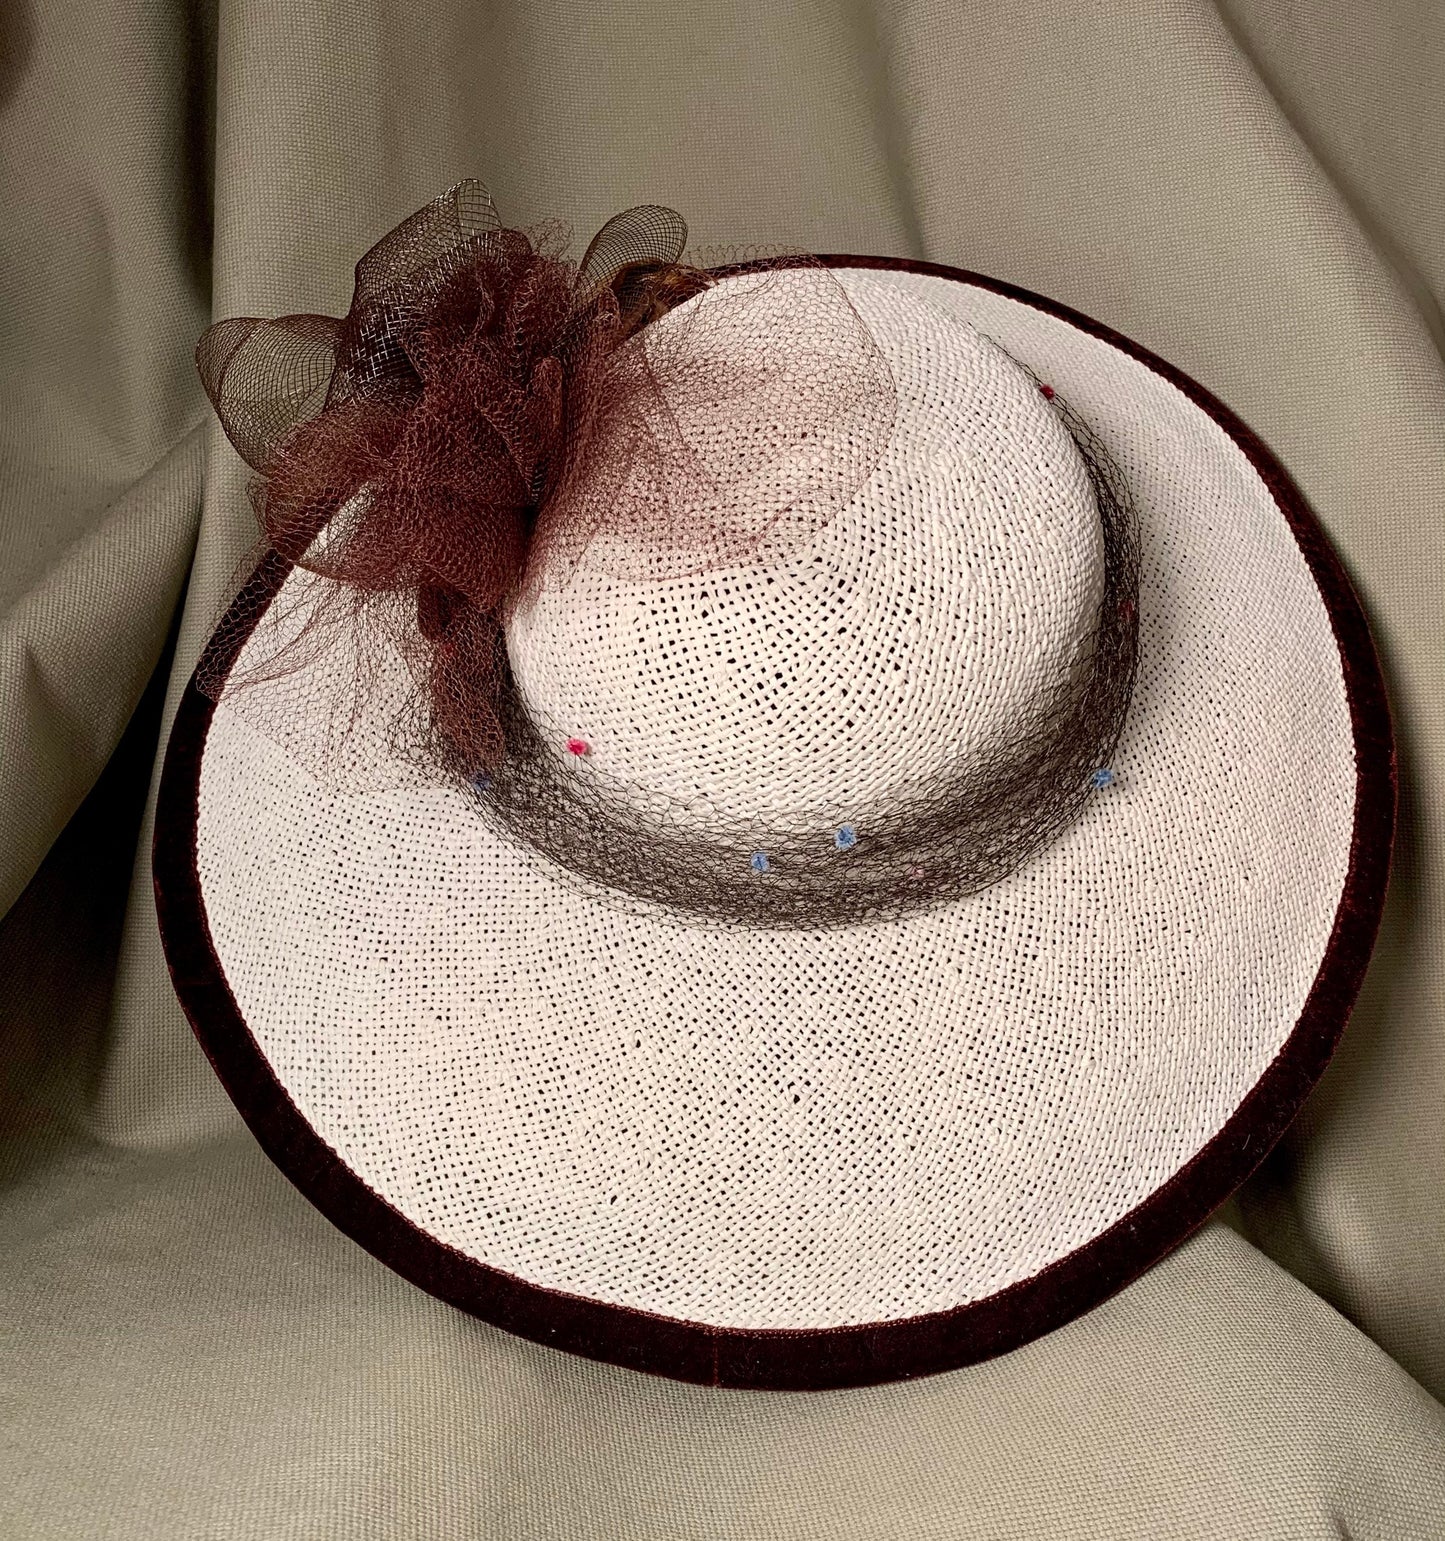 Ivory straw wide brim hat- Brown trim of feathers and netting-Vintage veiling on band-Kentucky Derby-Polo-Ascot-Belmont-Preakness Race Hats